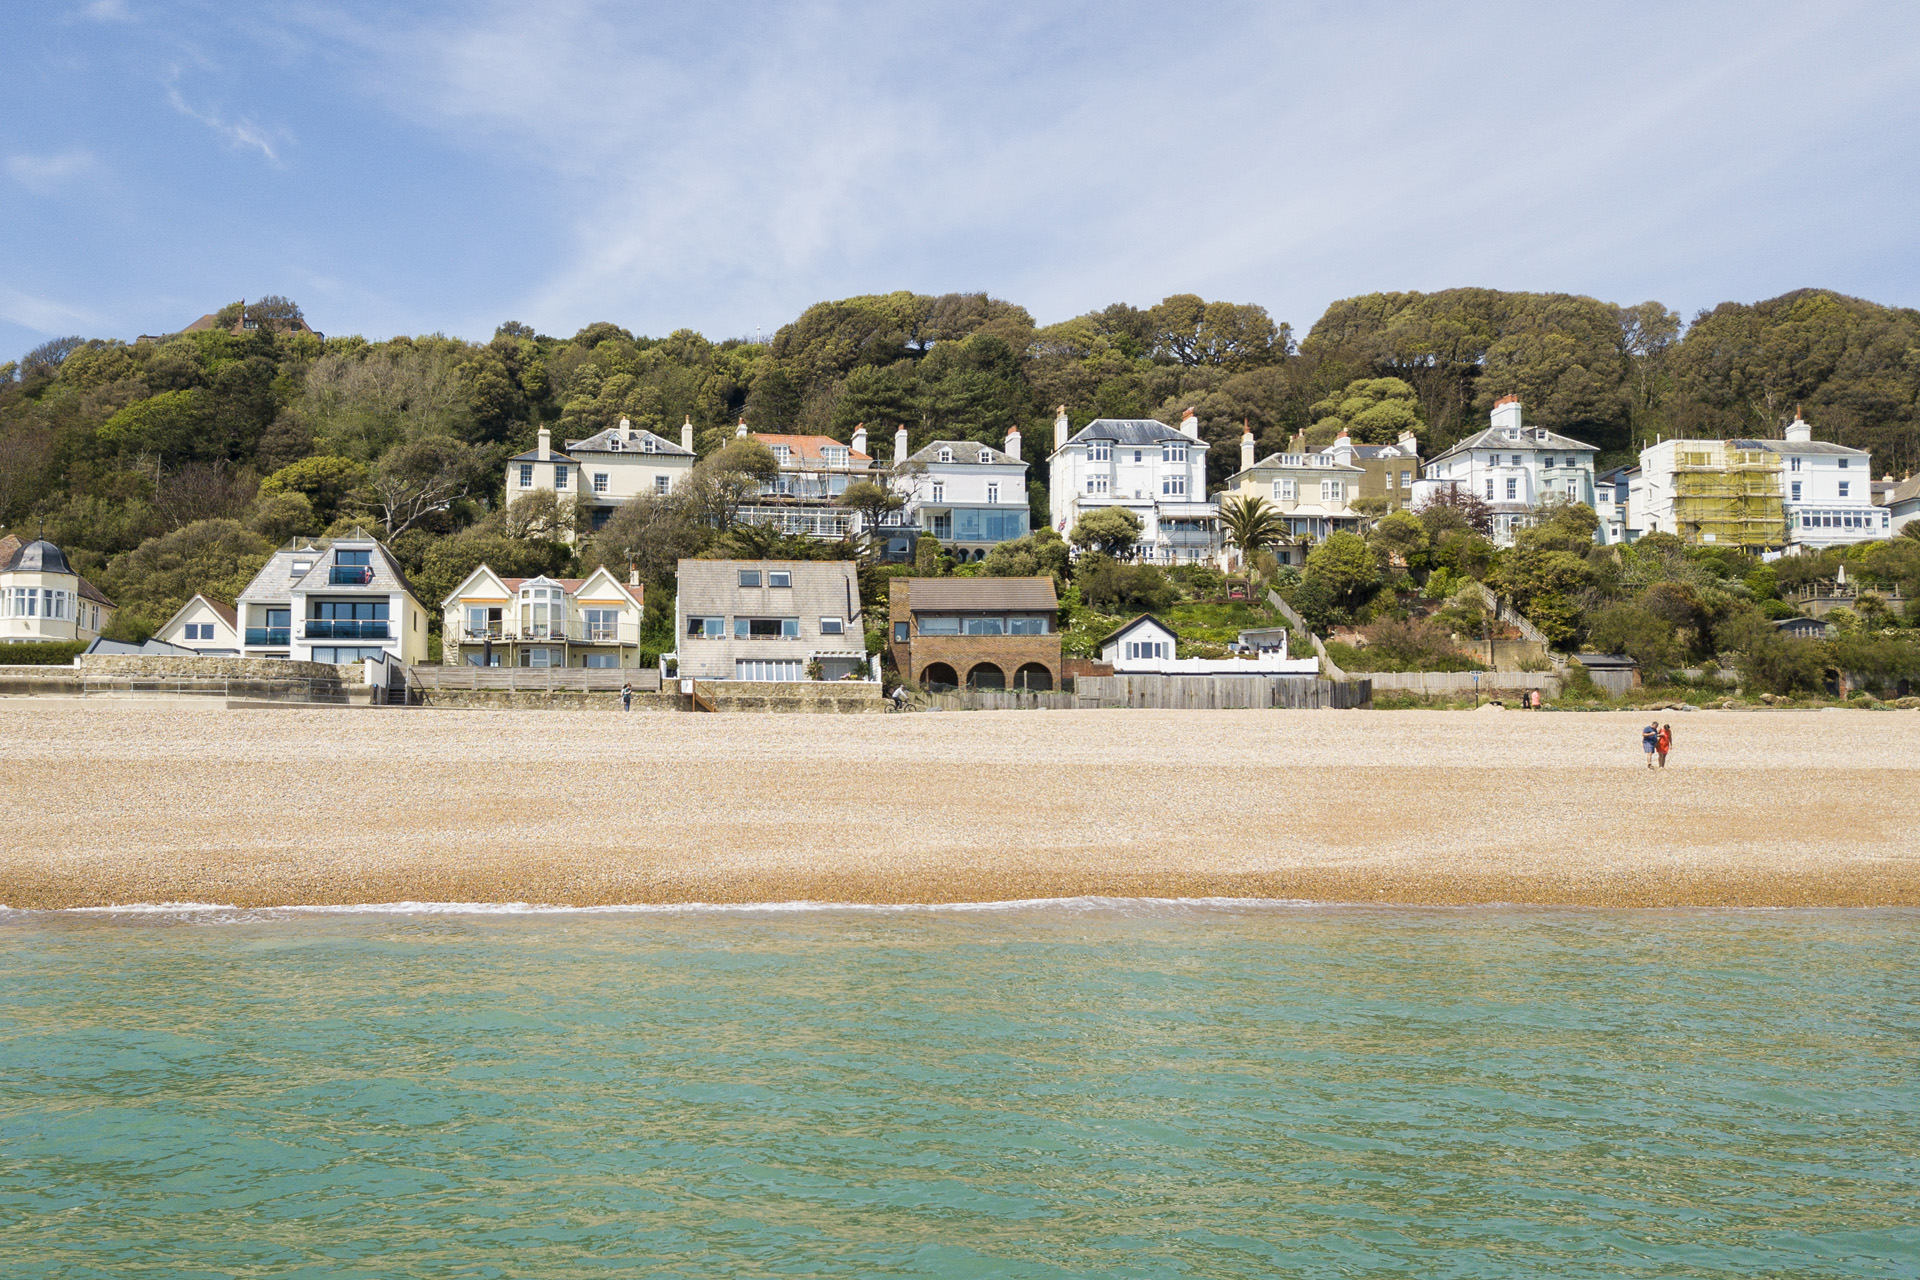 A line of houses on the beach in Folkestone